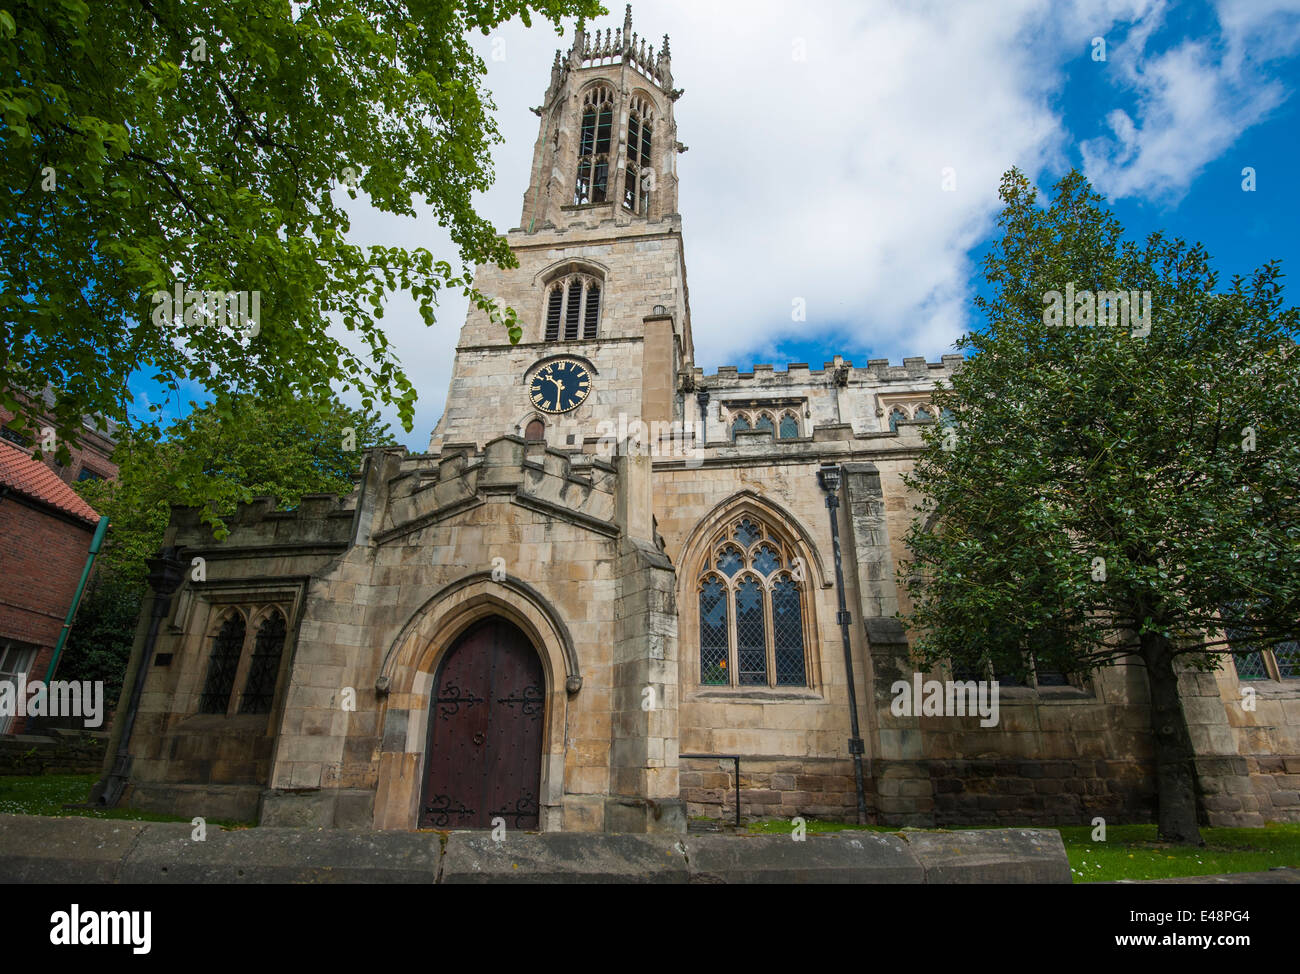 Old medieval All Saints church in english city of York with clock and octagonal lantern tower Stock Photo